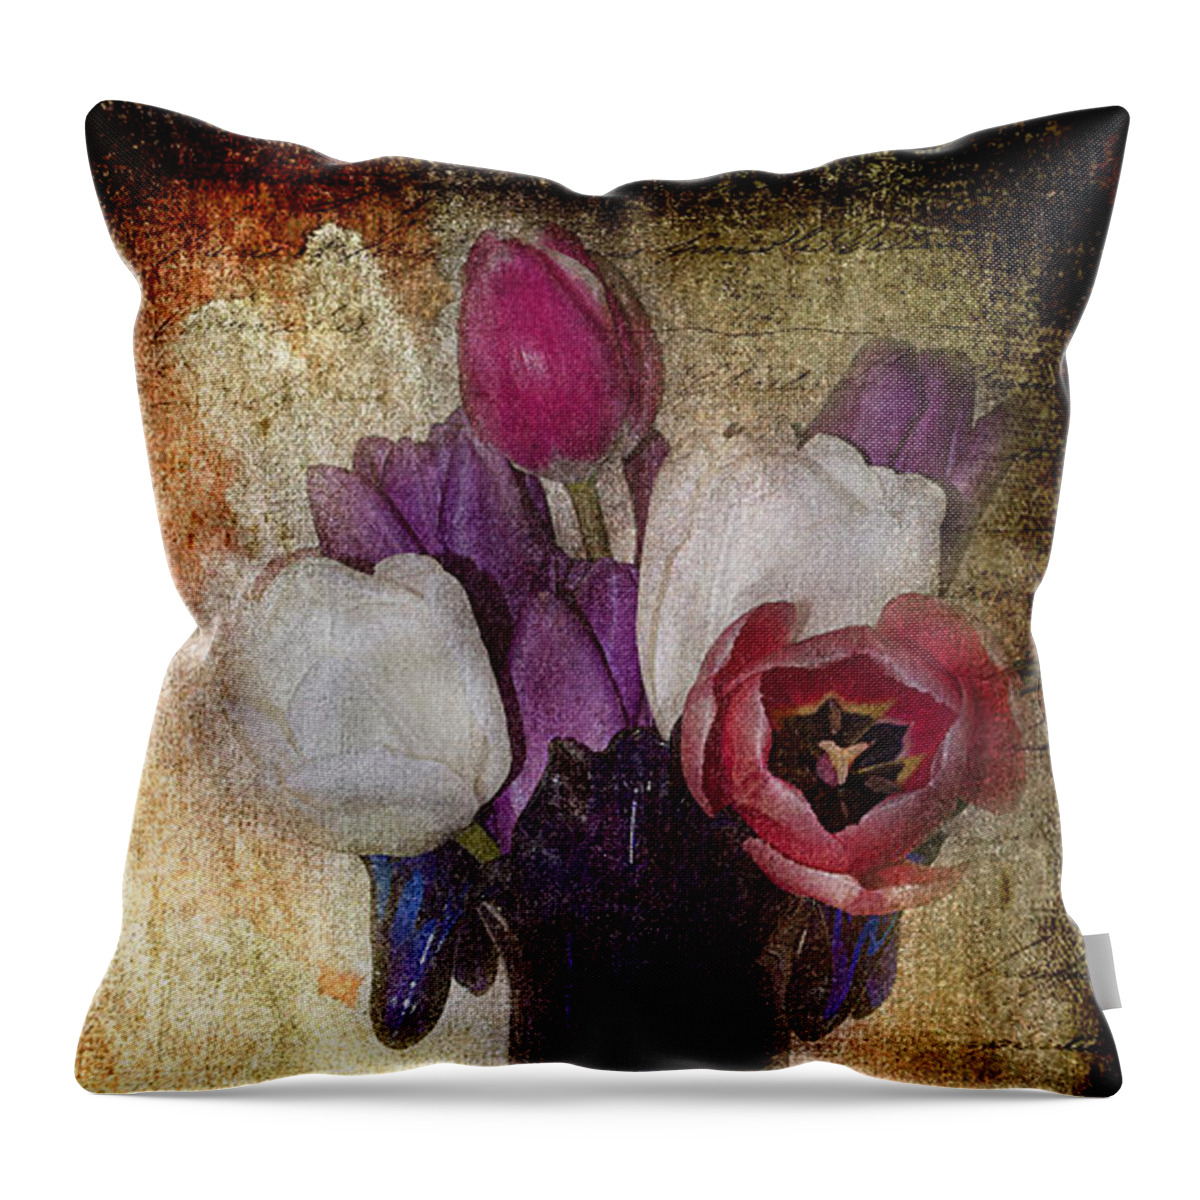 Tulips.flowers Throw Pillow featuring the photograph Tulips And Texture by Phyllis Denton